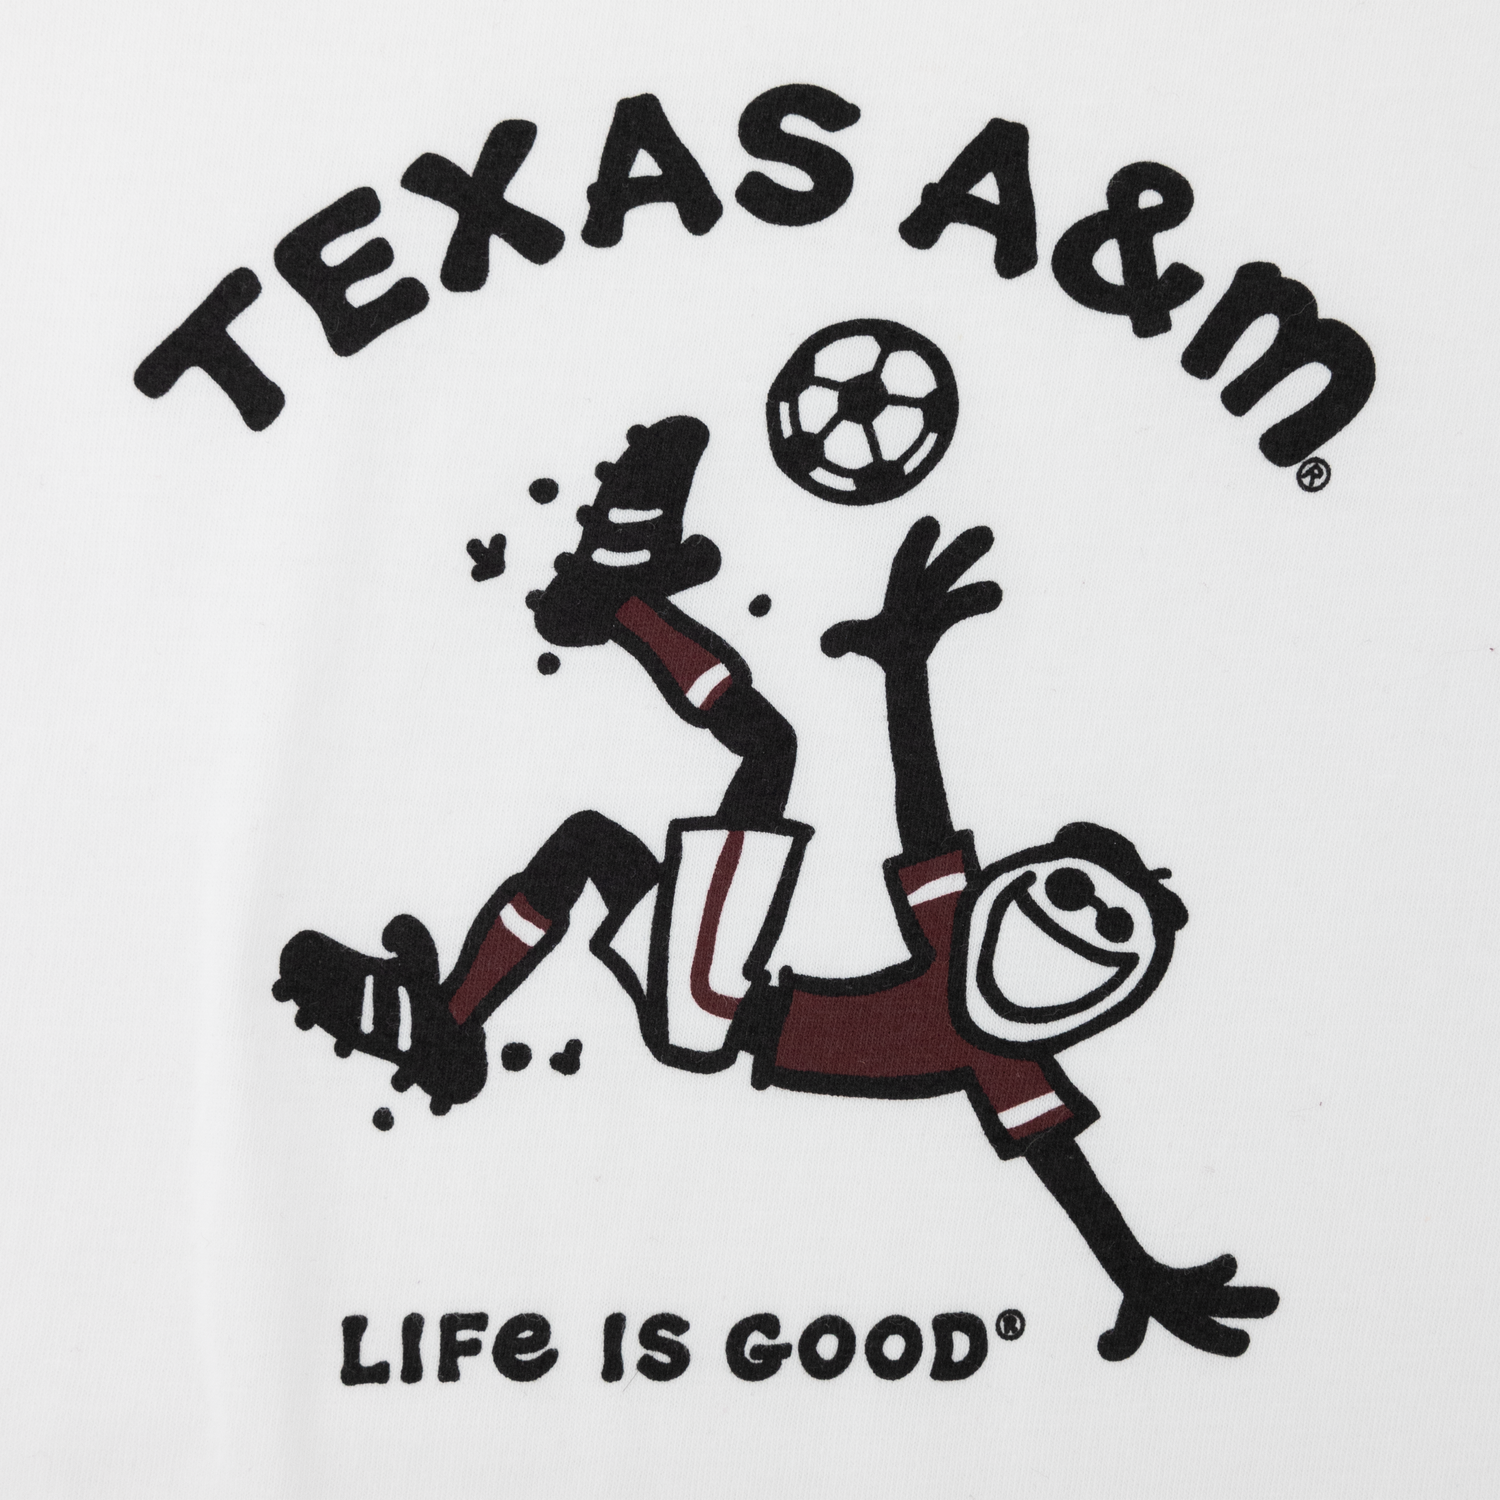 Texas A&M Life is Good Jake Soccer White T-Shirt